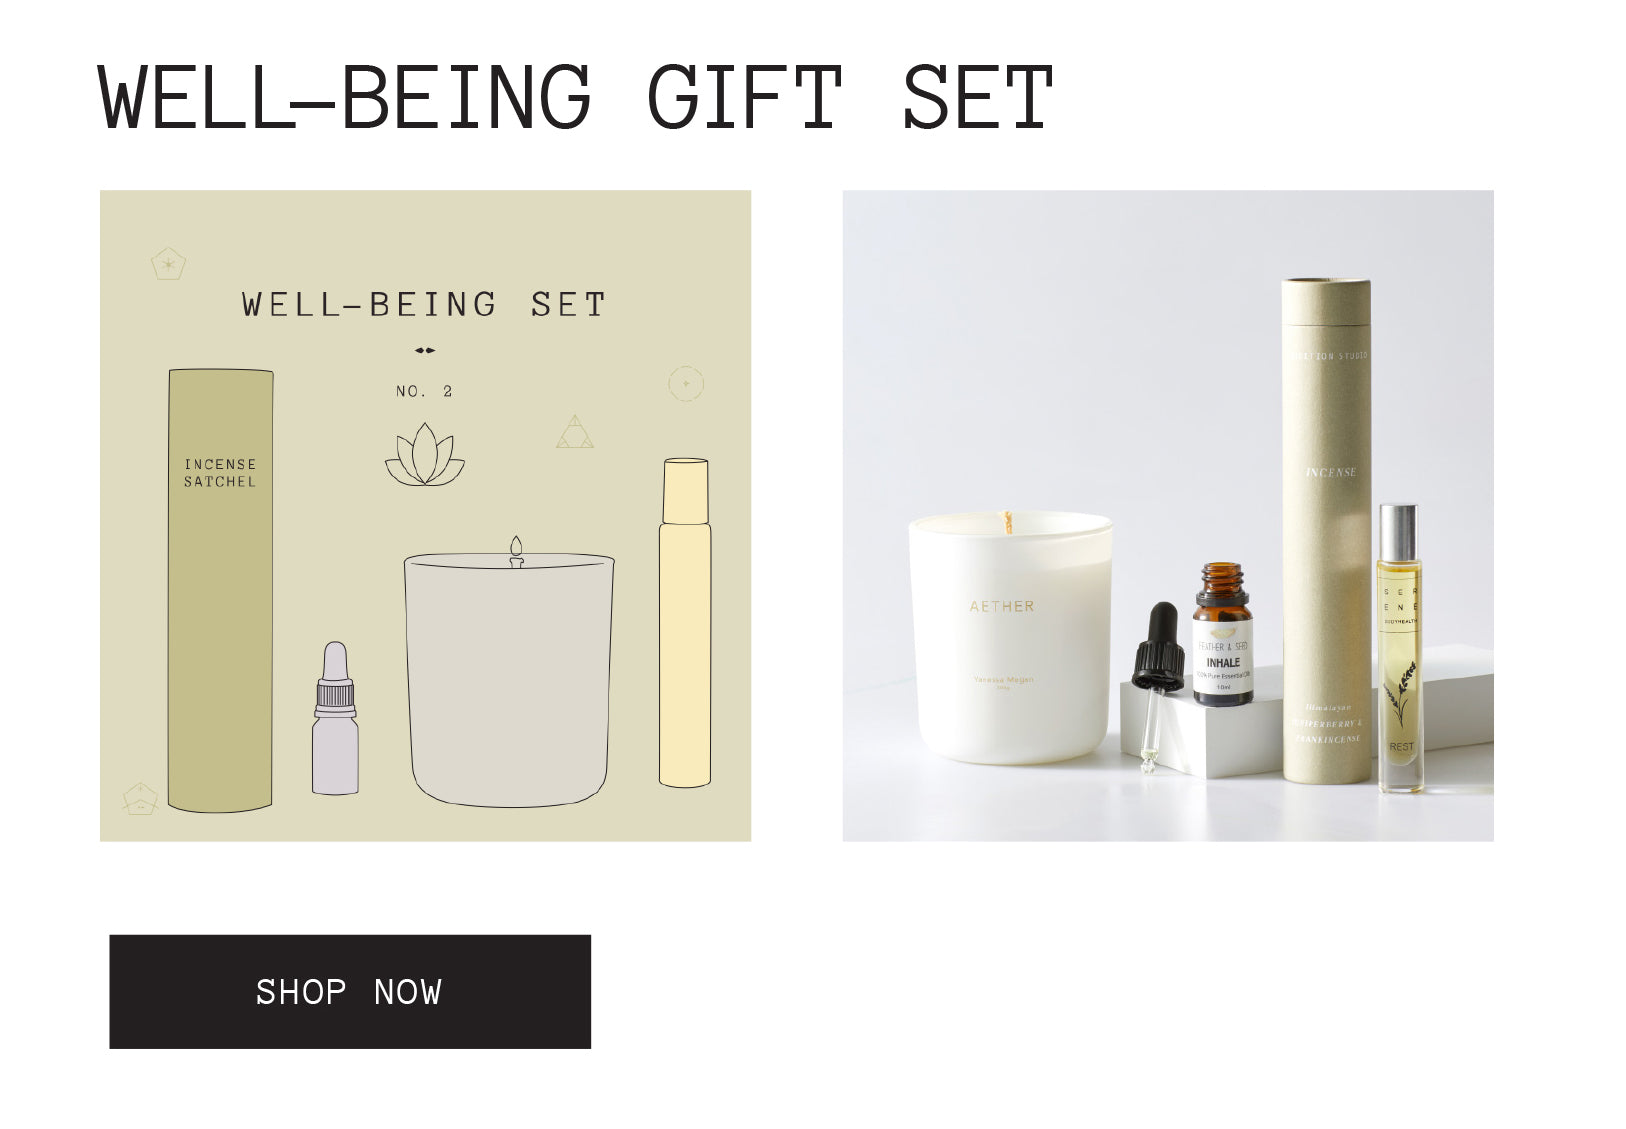 Well-being gift set for Valentines Day